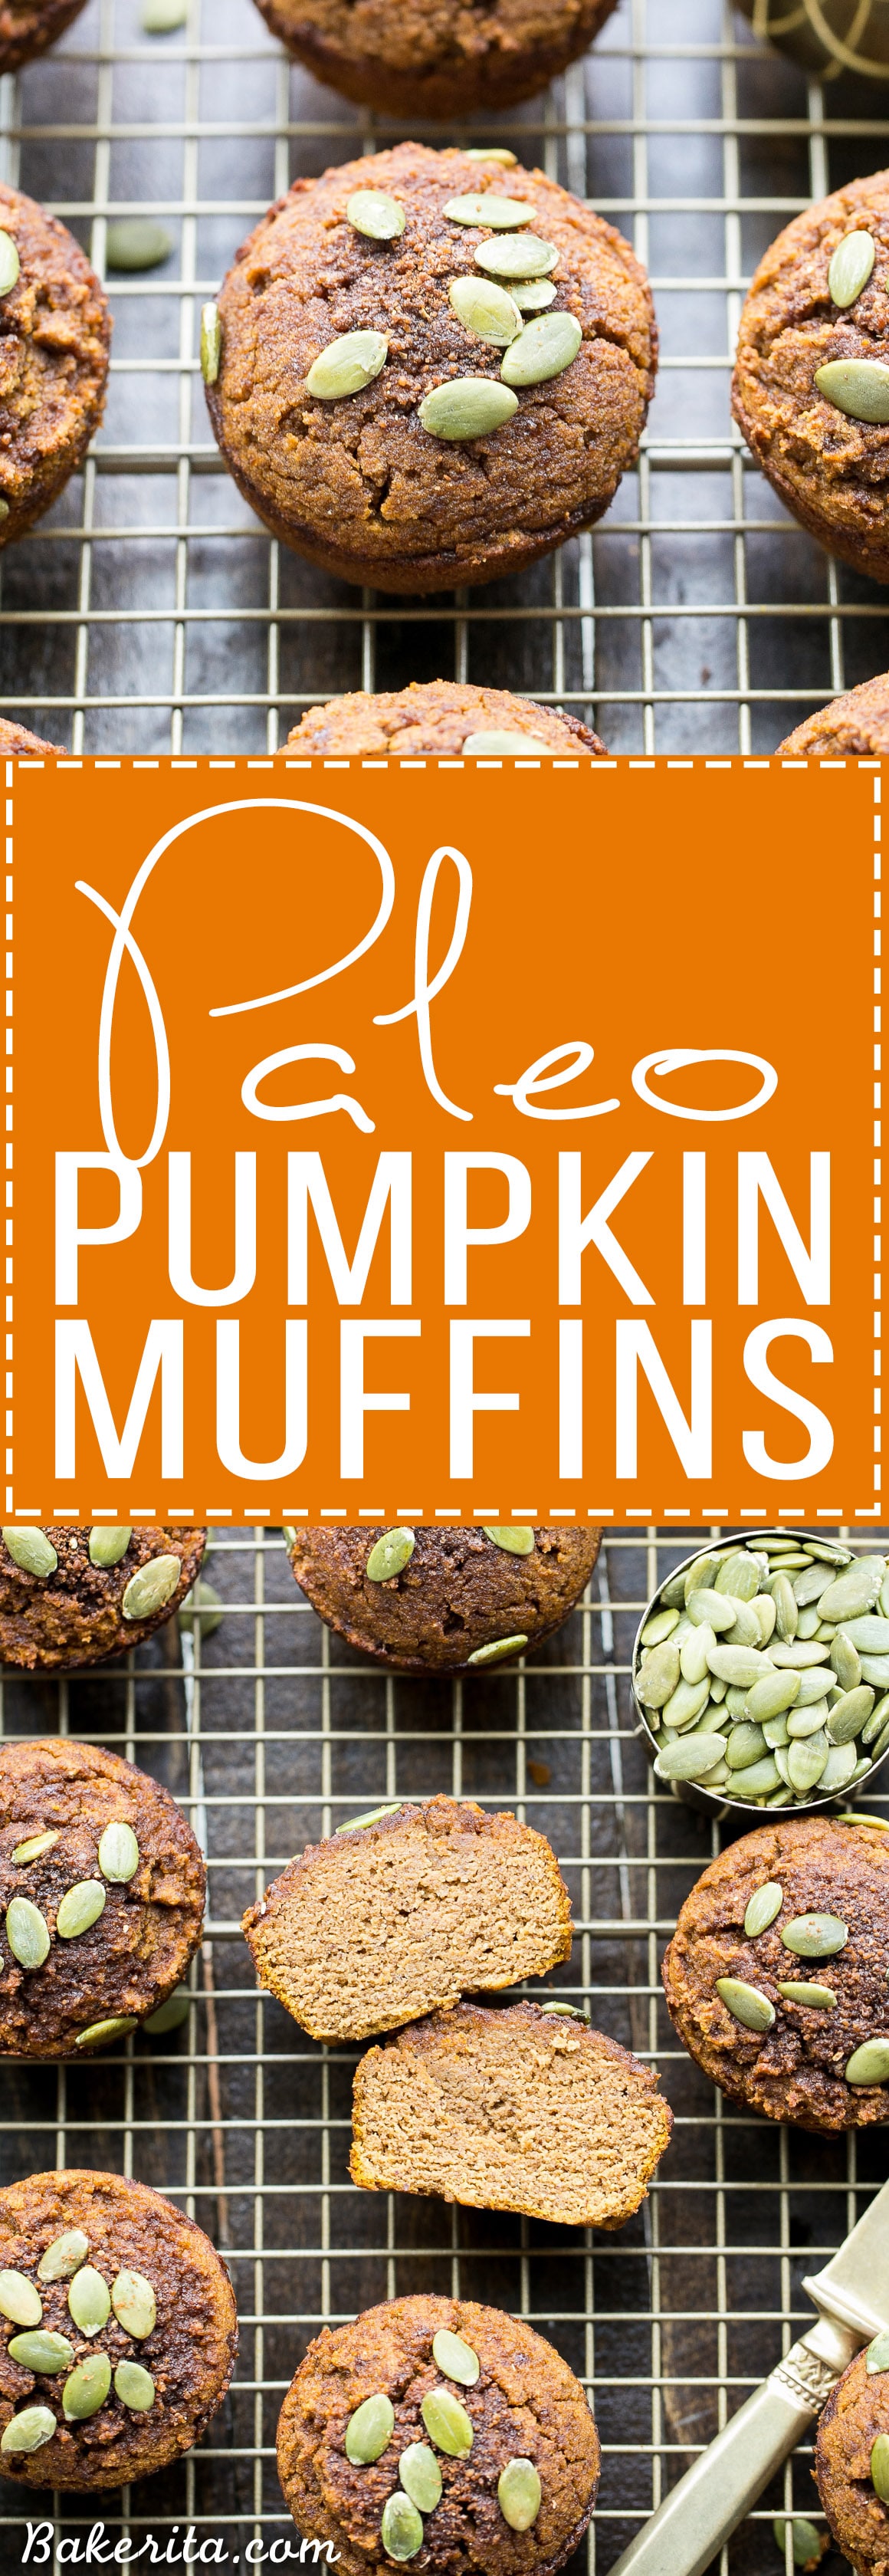 These Paleo Pumpkin Muffins, made with coconut flour and almond butter, are moist, fluffy, and lightly spiced with cinnamon and nutmeg. These healthy muffins make a great breakfast or snack and freeze well.